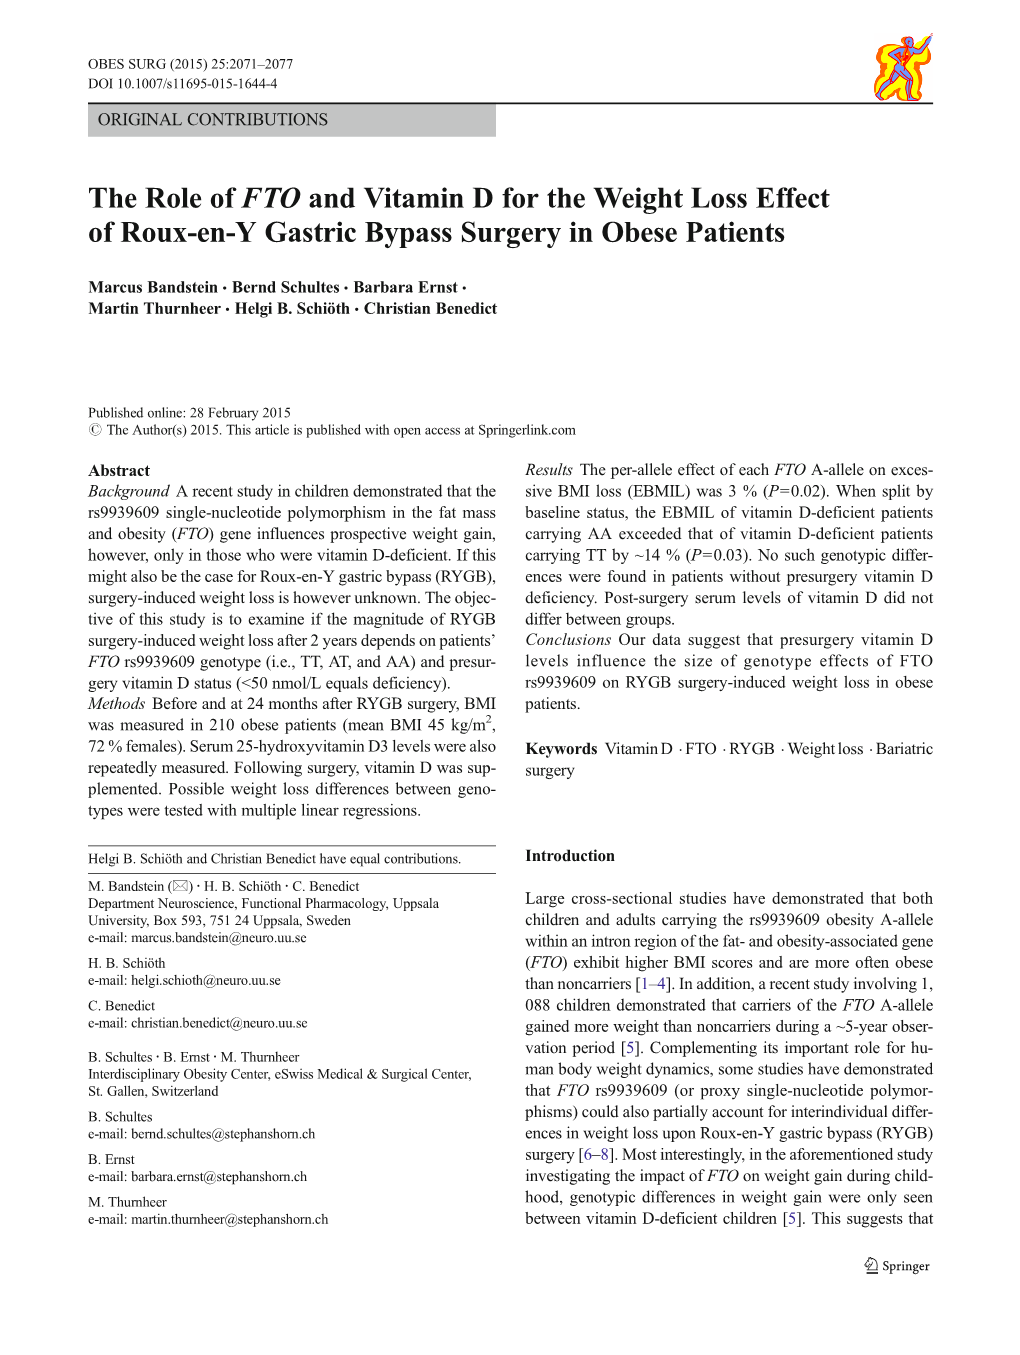 The Role of FTO and Vitamin D for the Weight Loss Effect of Roux-En-Y Gastric Bypass Surgery in Obese Patients